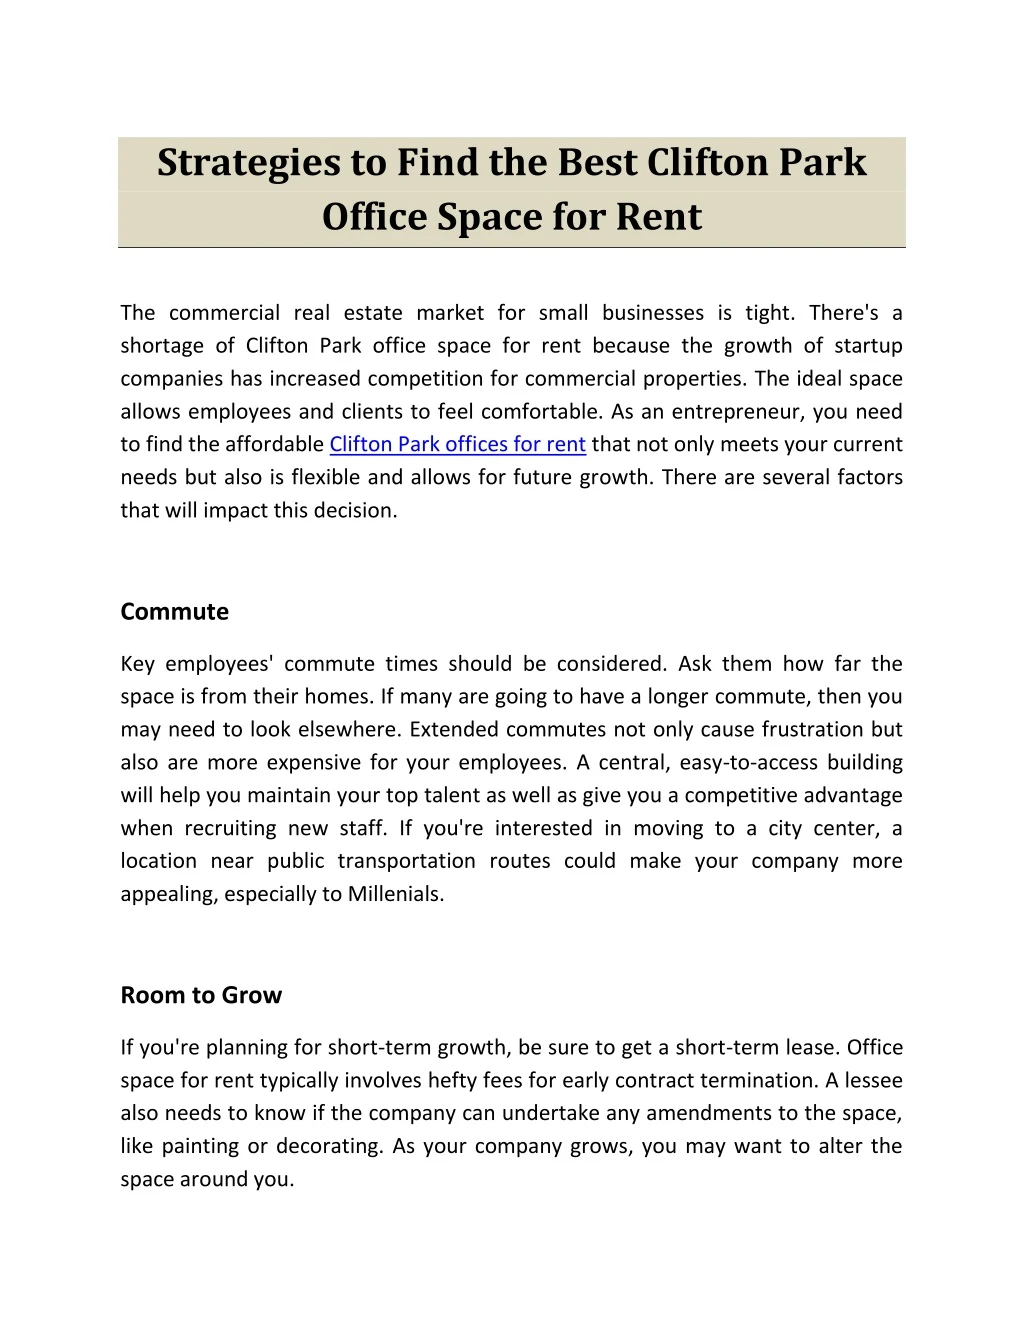 strategies to find the best clifton park office